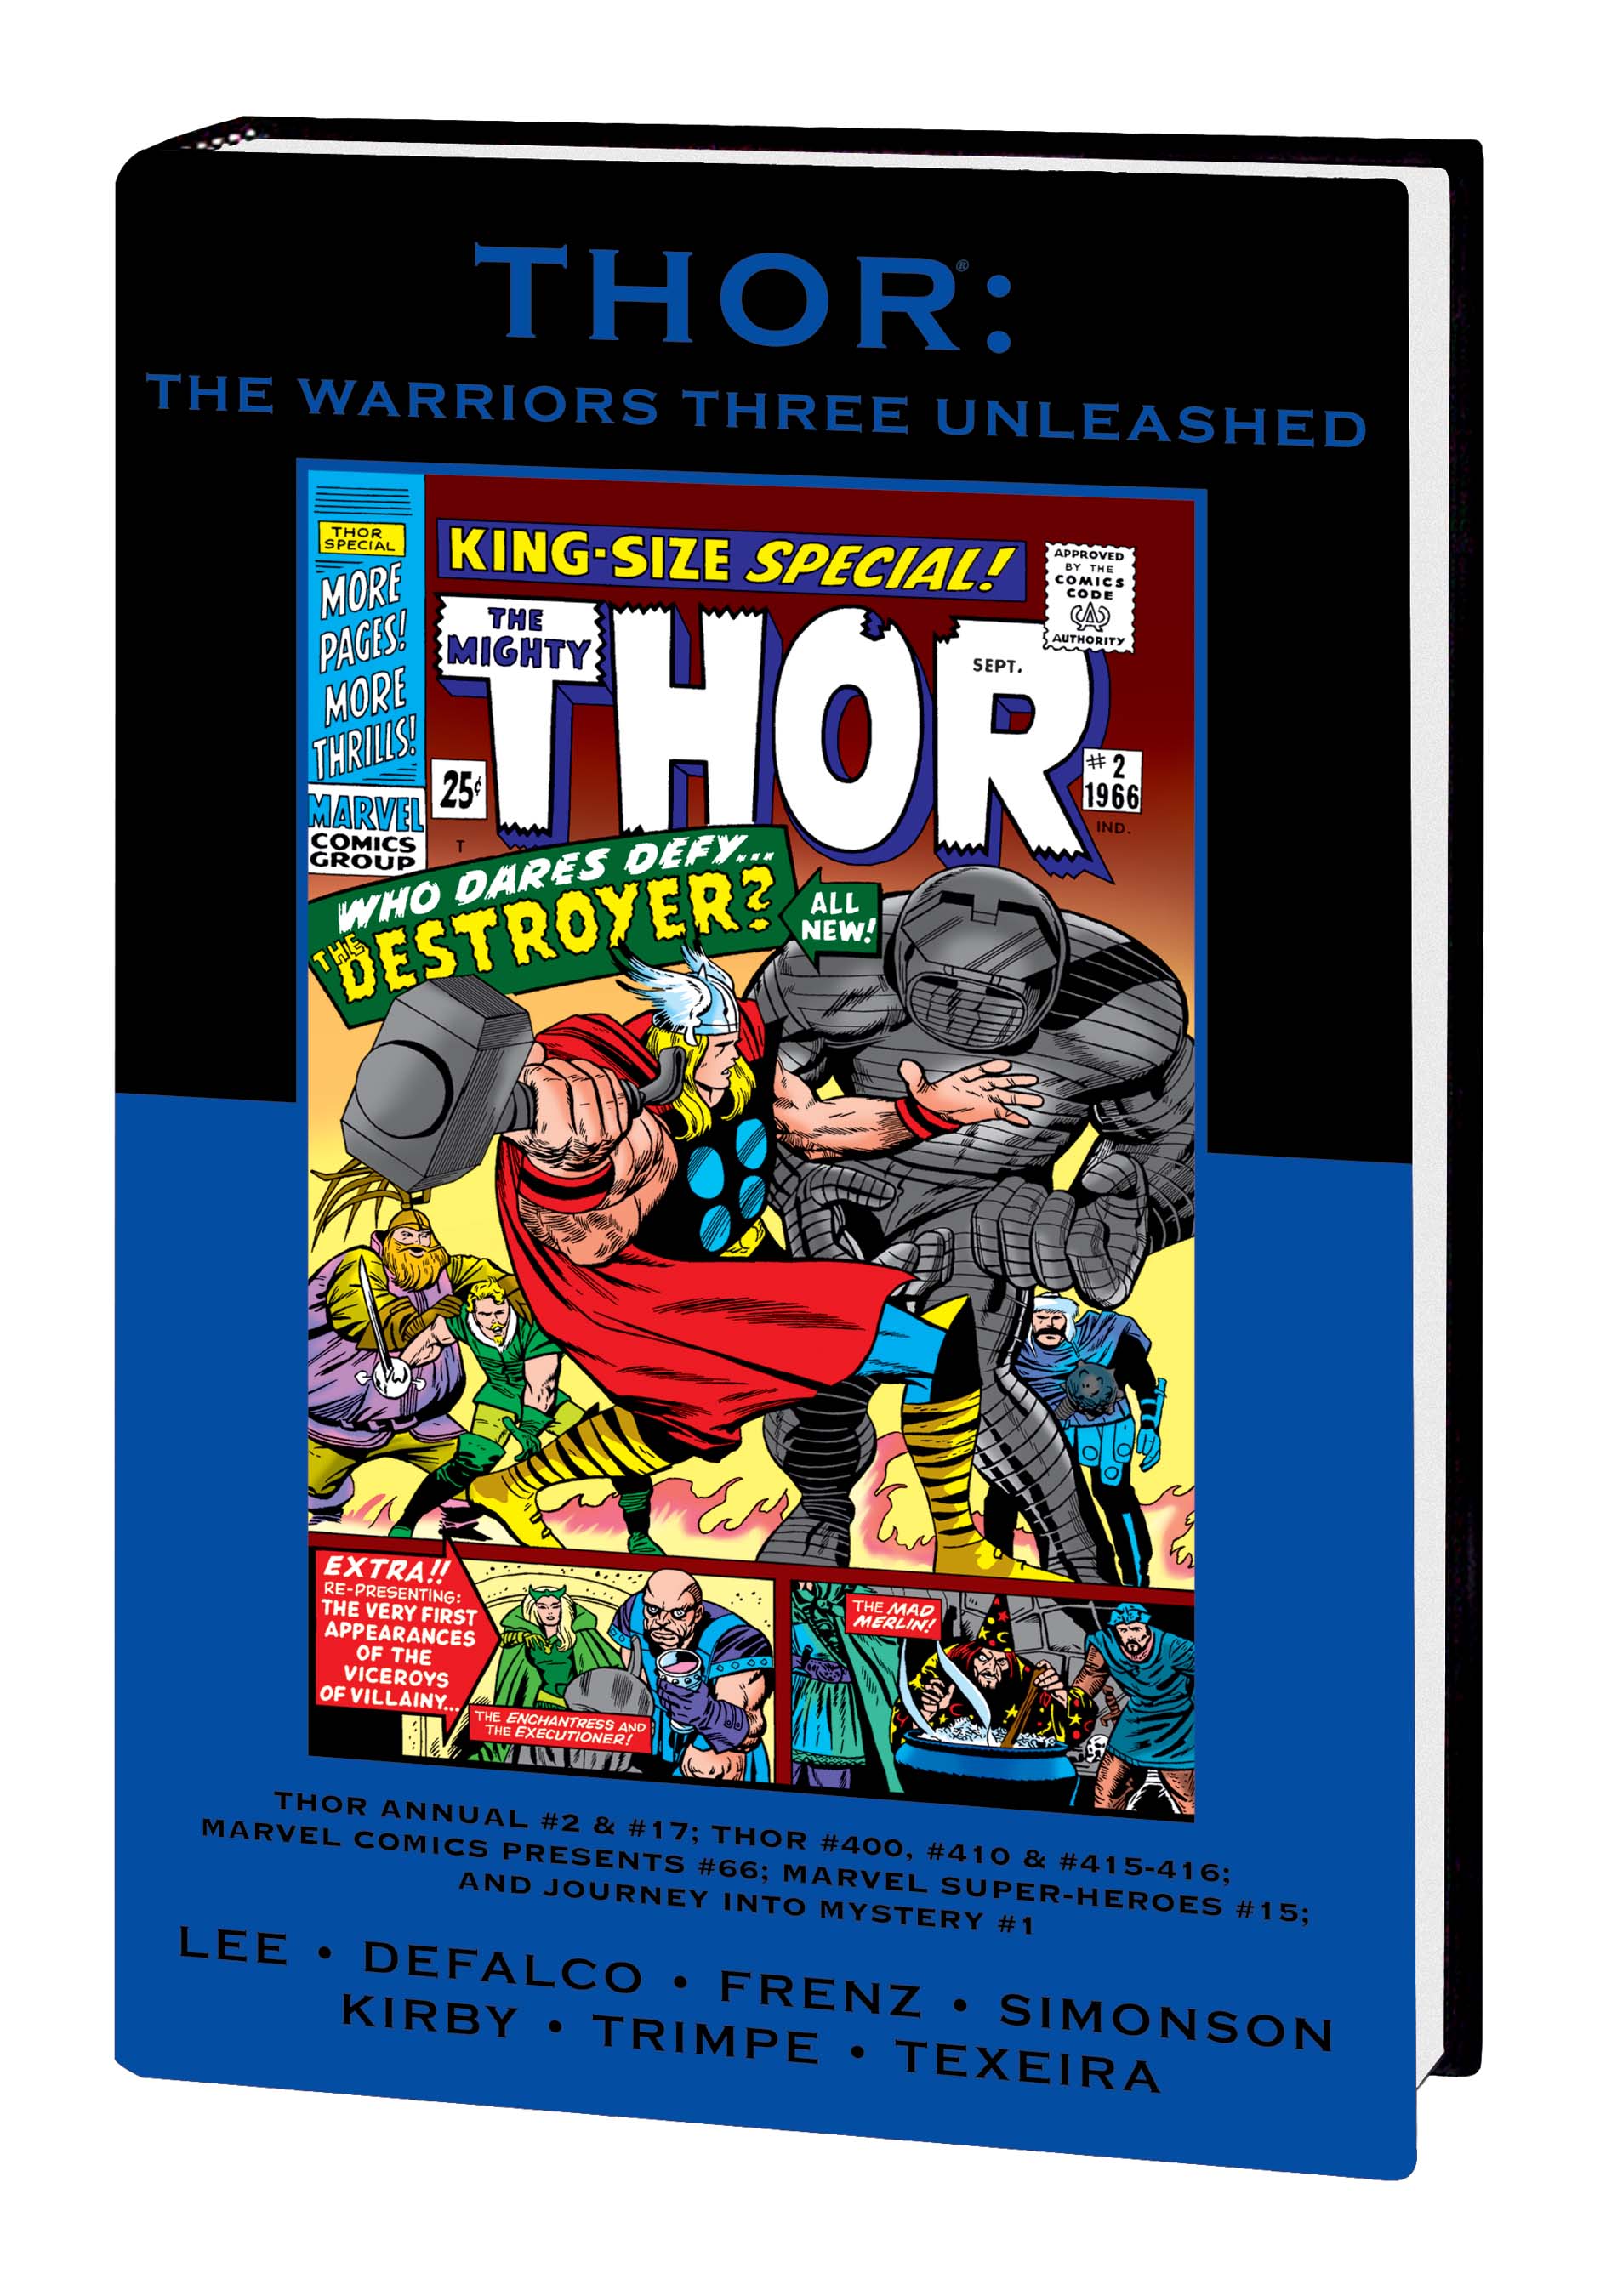 THOR: THE WARRIORS THREE UNLEASHED PREMIERE HC [DM ONLY] (Hardcover)